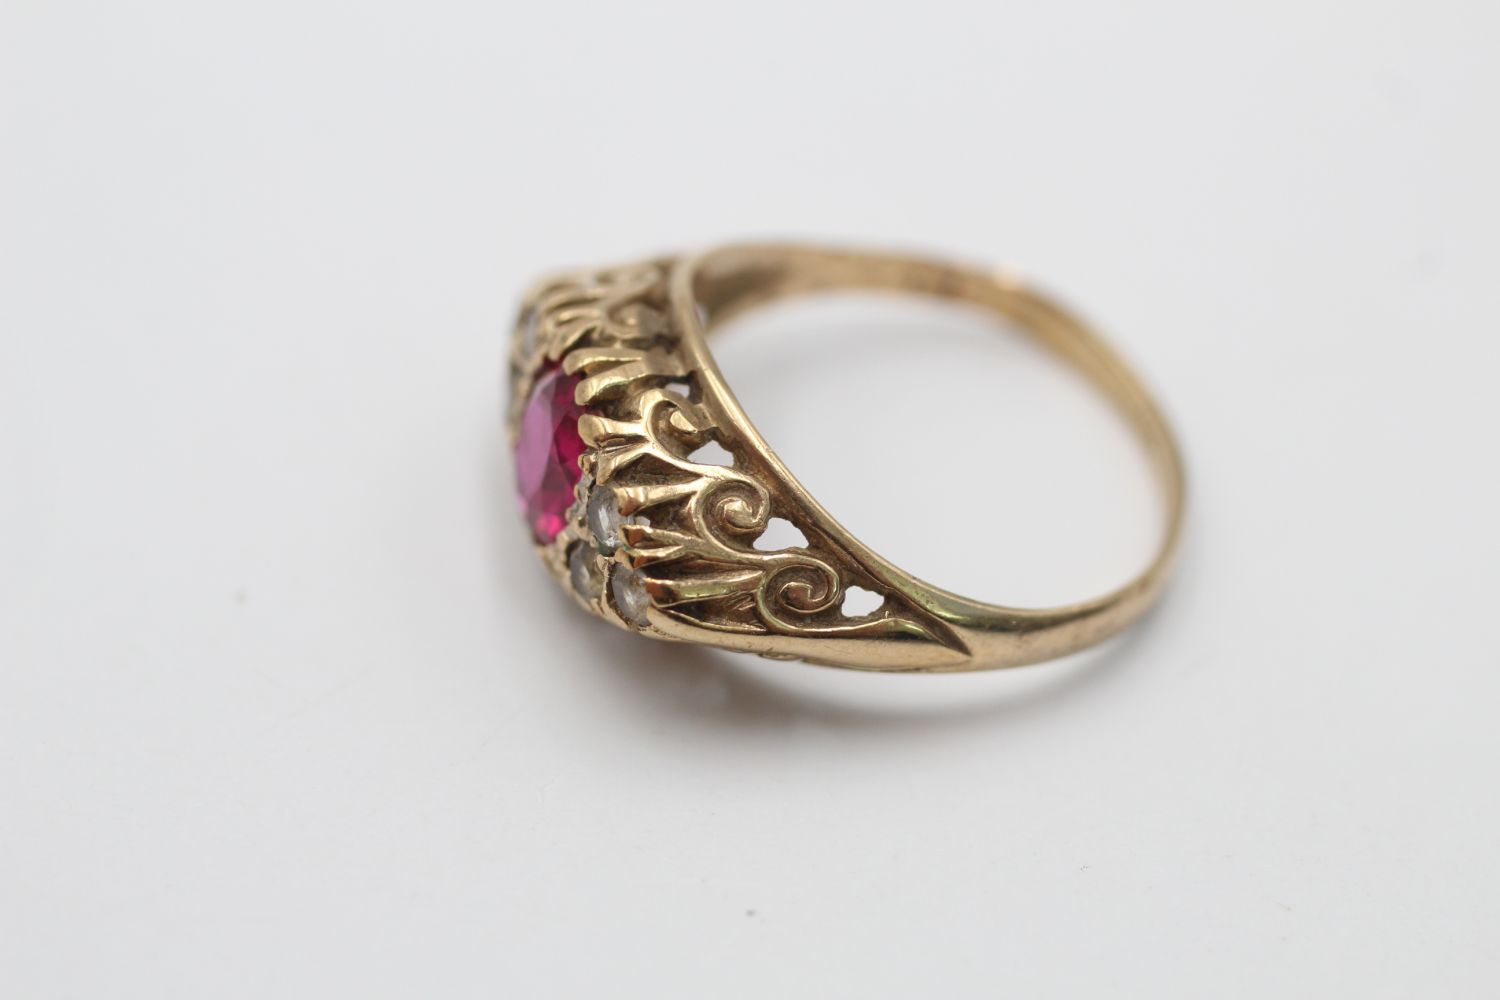 9ct gold vintage ruby & diamond seven stone gypsy setting ring (2.4g) - Image 2 of 5